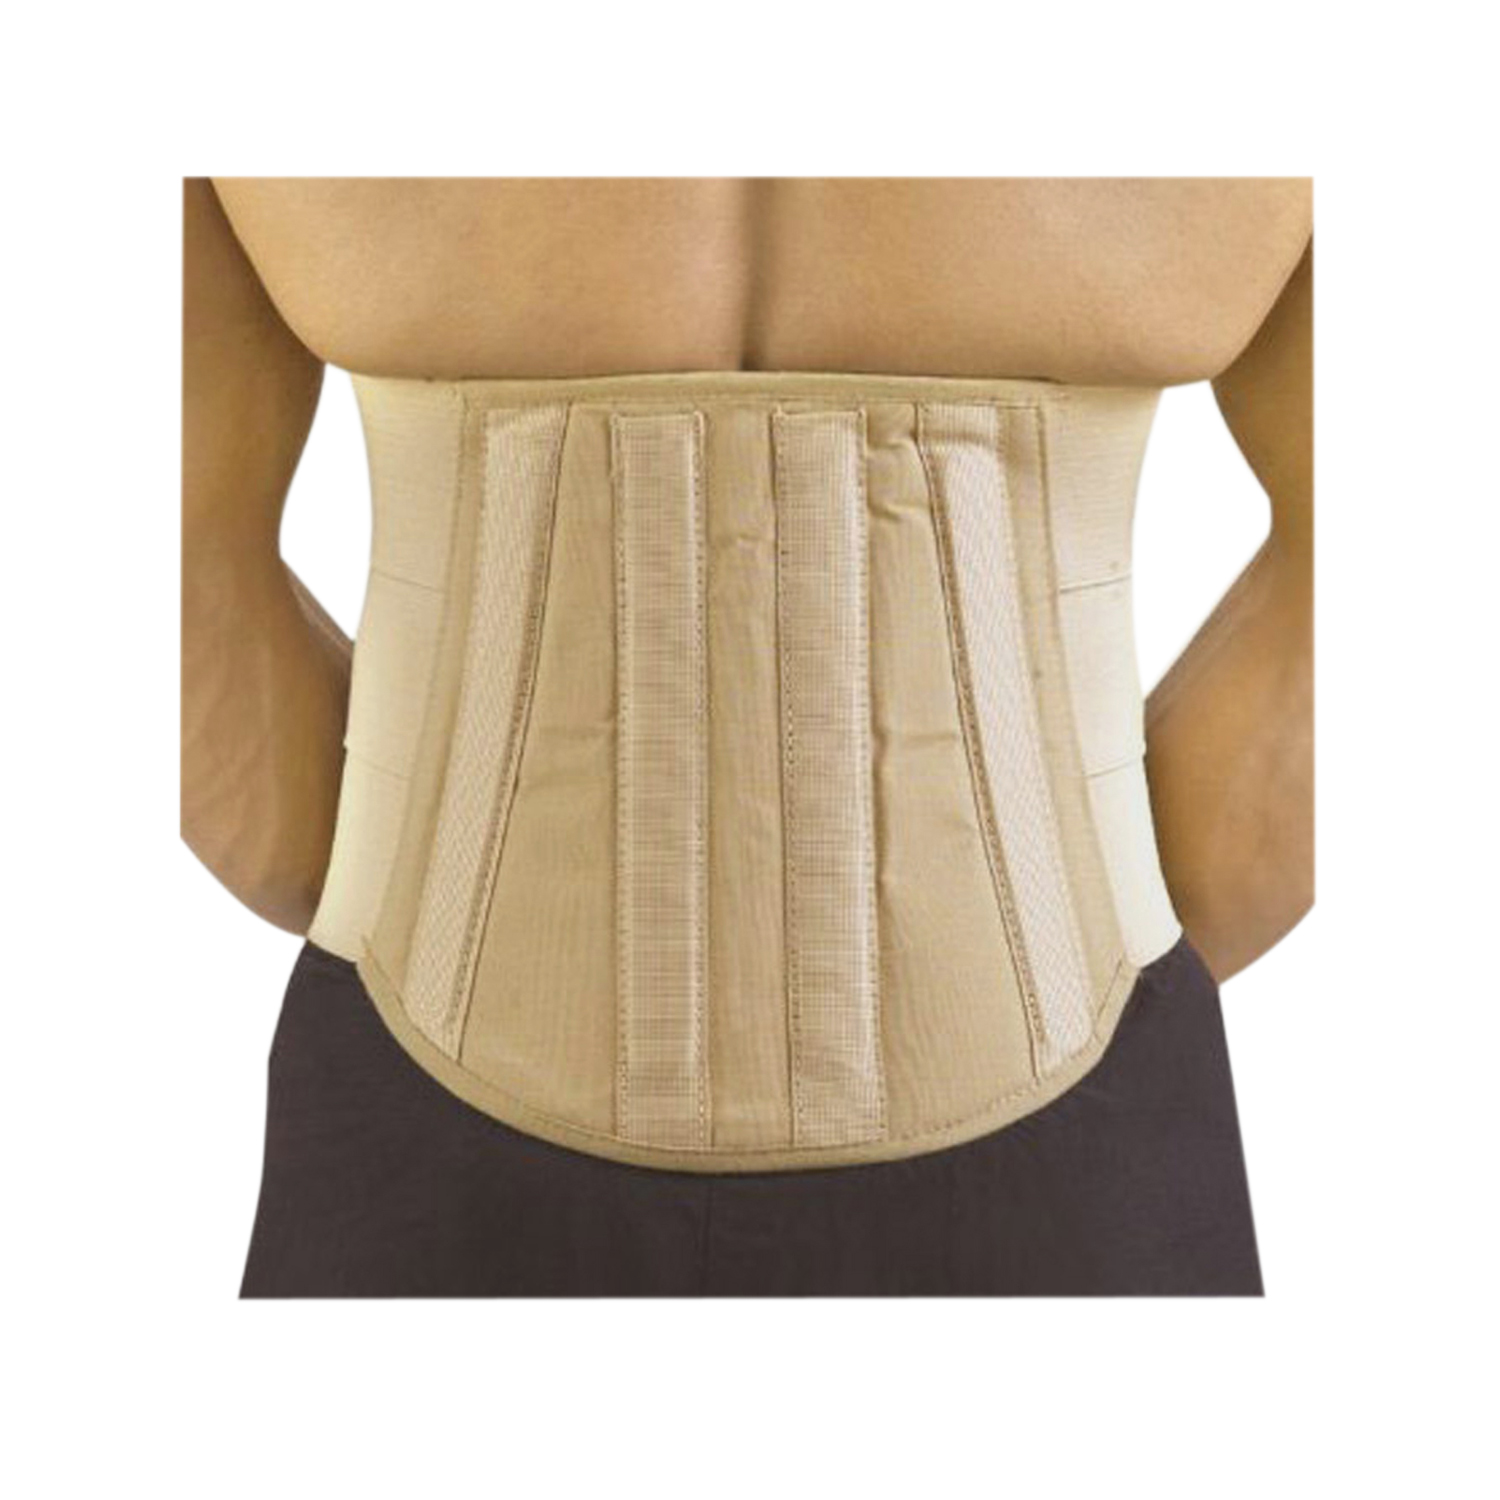 Dyna Surgical Abdominal Corset Medium Buy Online at Best Price in India -  Cureka